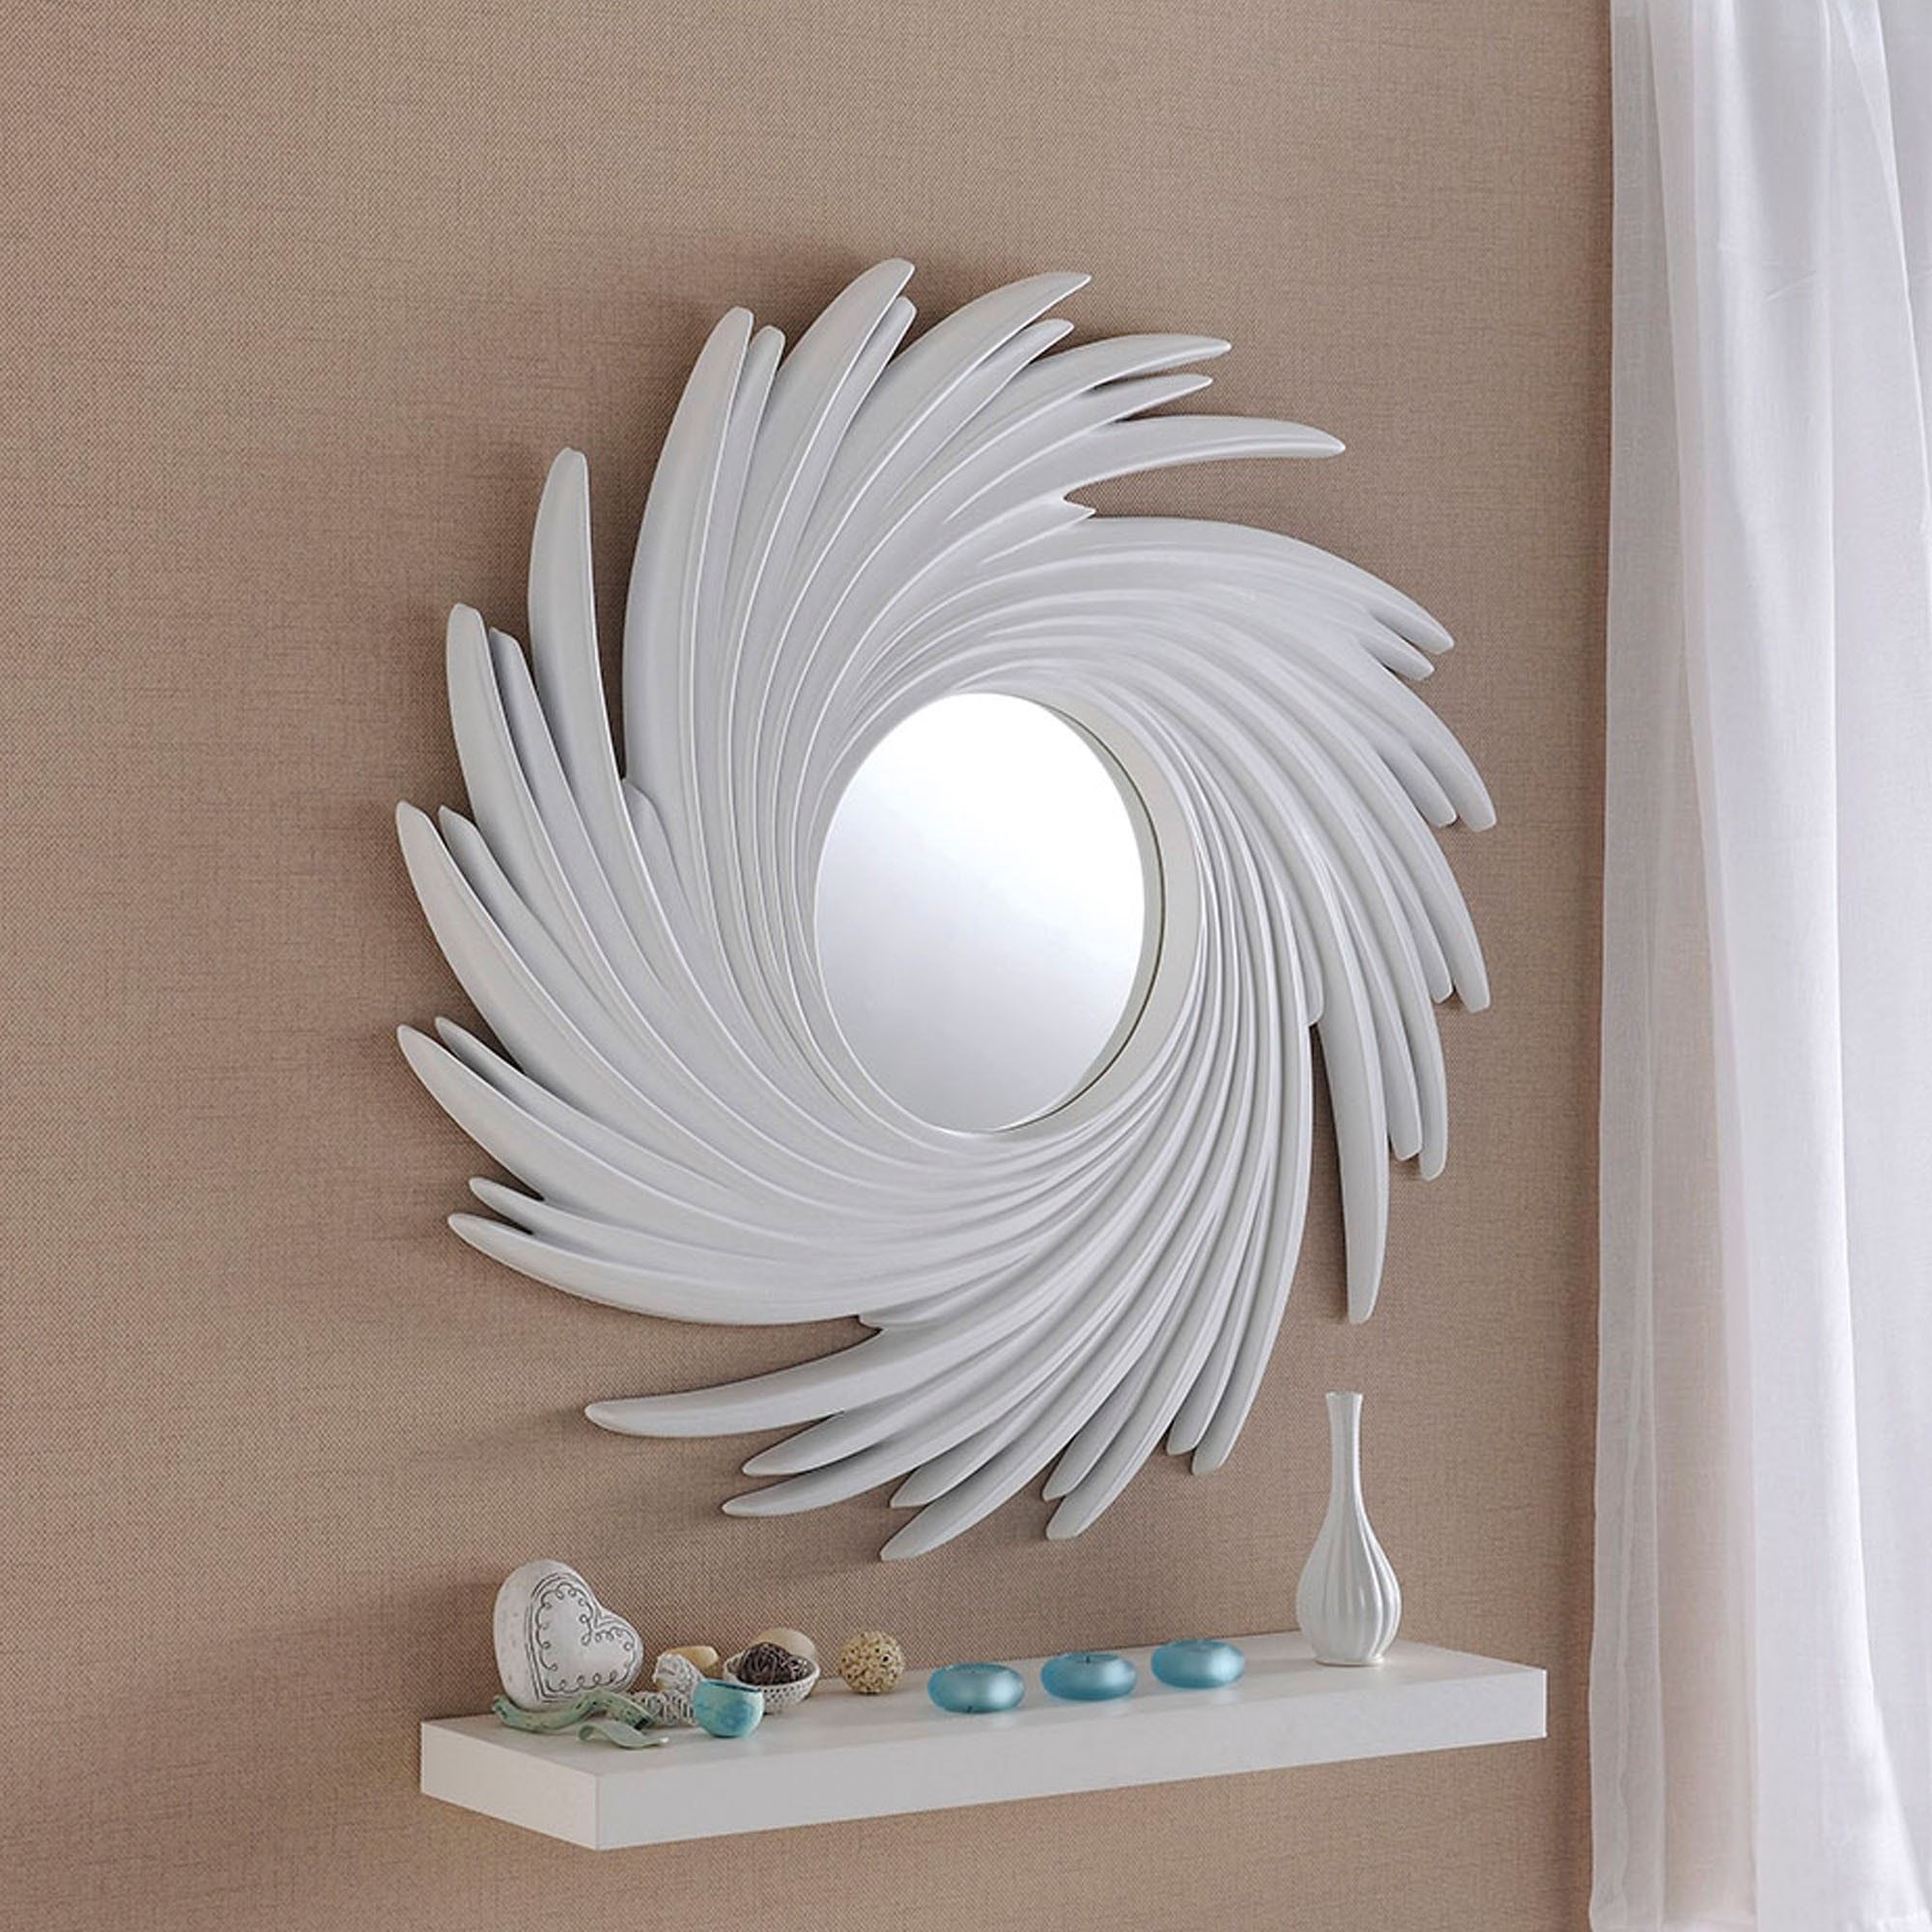 Contemporary White Swirl Wall Mirror | Contemporary Wall Mirrors In Sartain Modern & Contemporary Wall Mirrors (View 1 of 15)